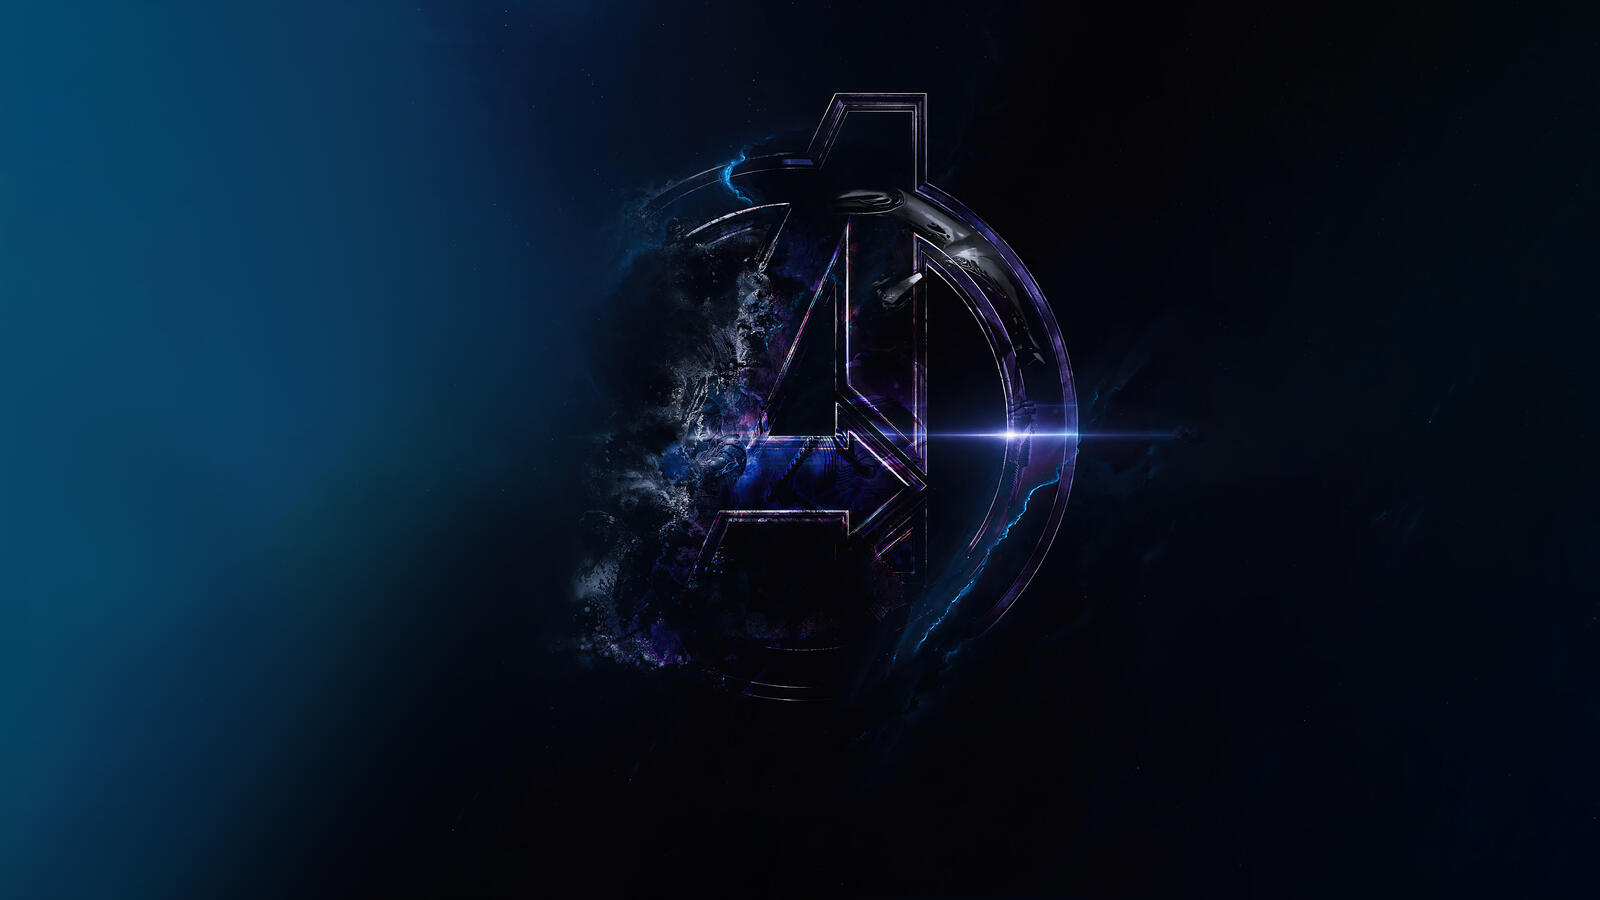 Wallpapers avengers infinity war films movies and tv series on the desktop